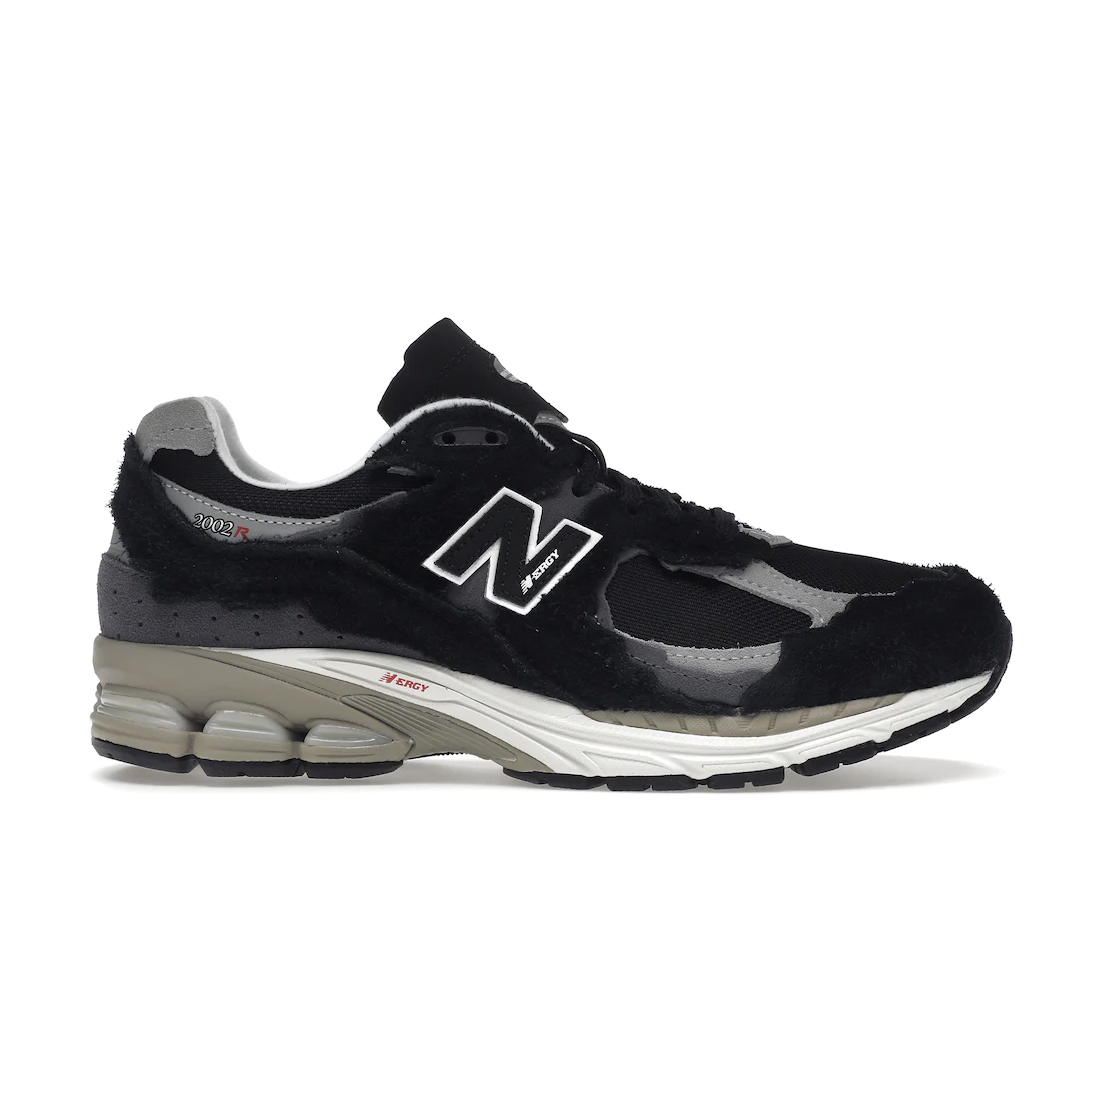 New Balance 2002R Protection Pack Black Grey from New Balance